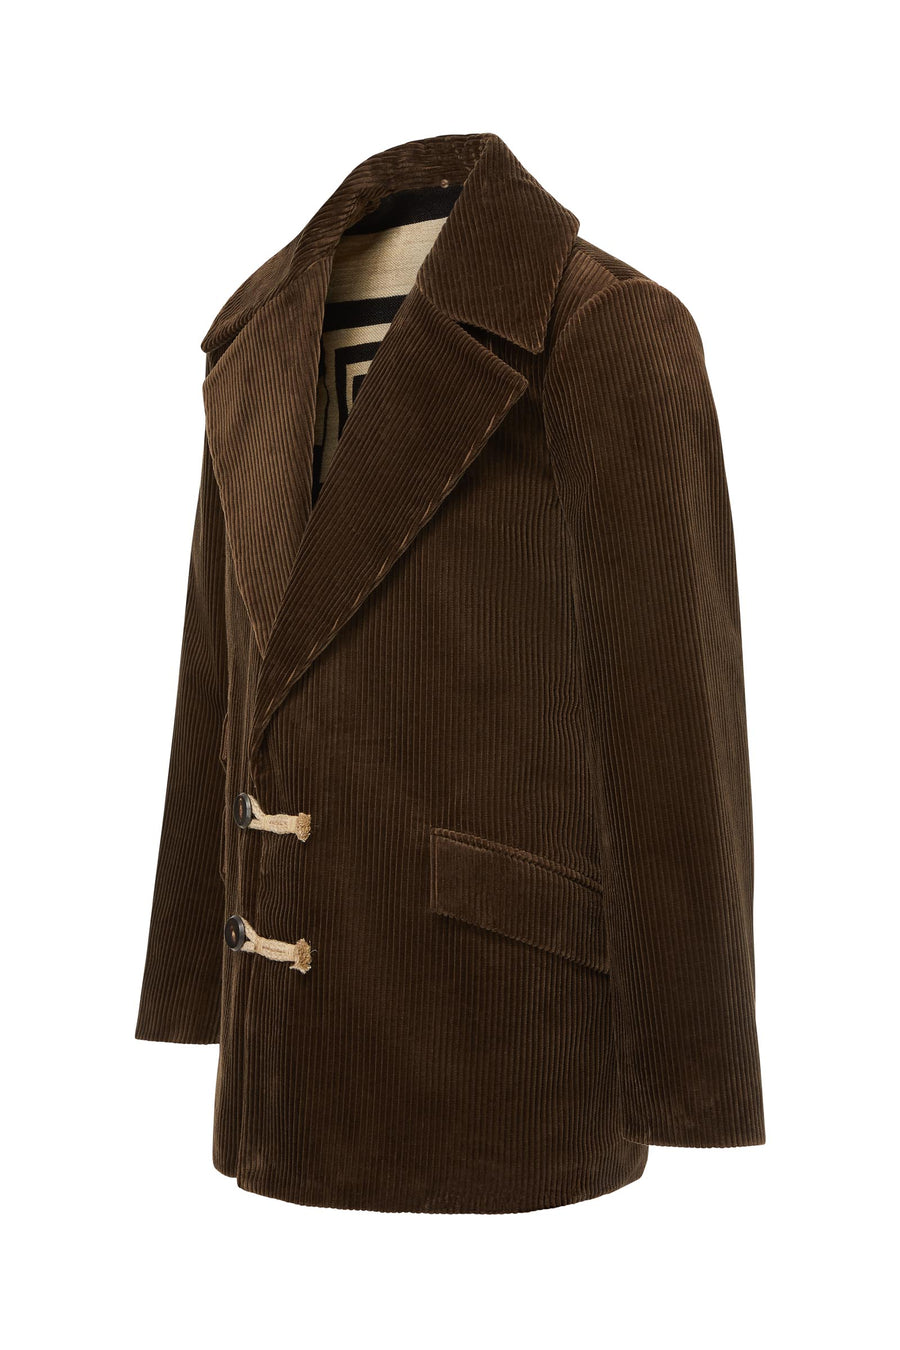 Luxury men's corduroy jacket brown with black and white lining made of wool and cotton